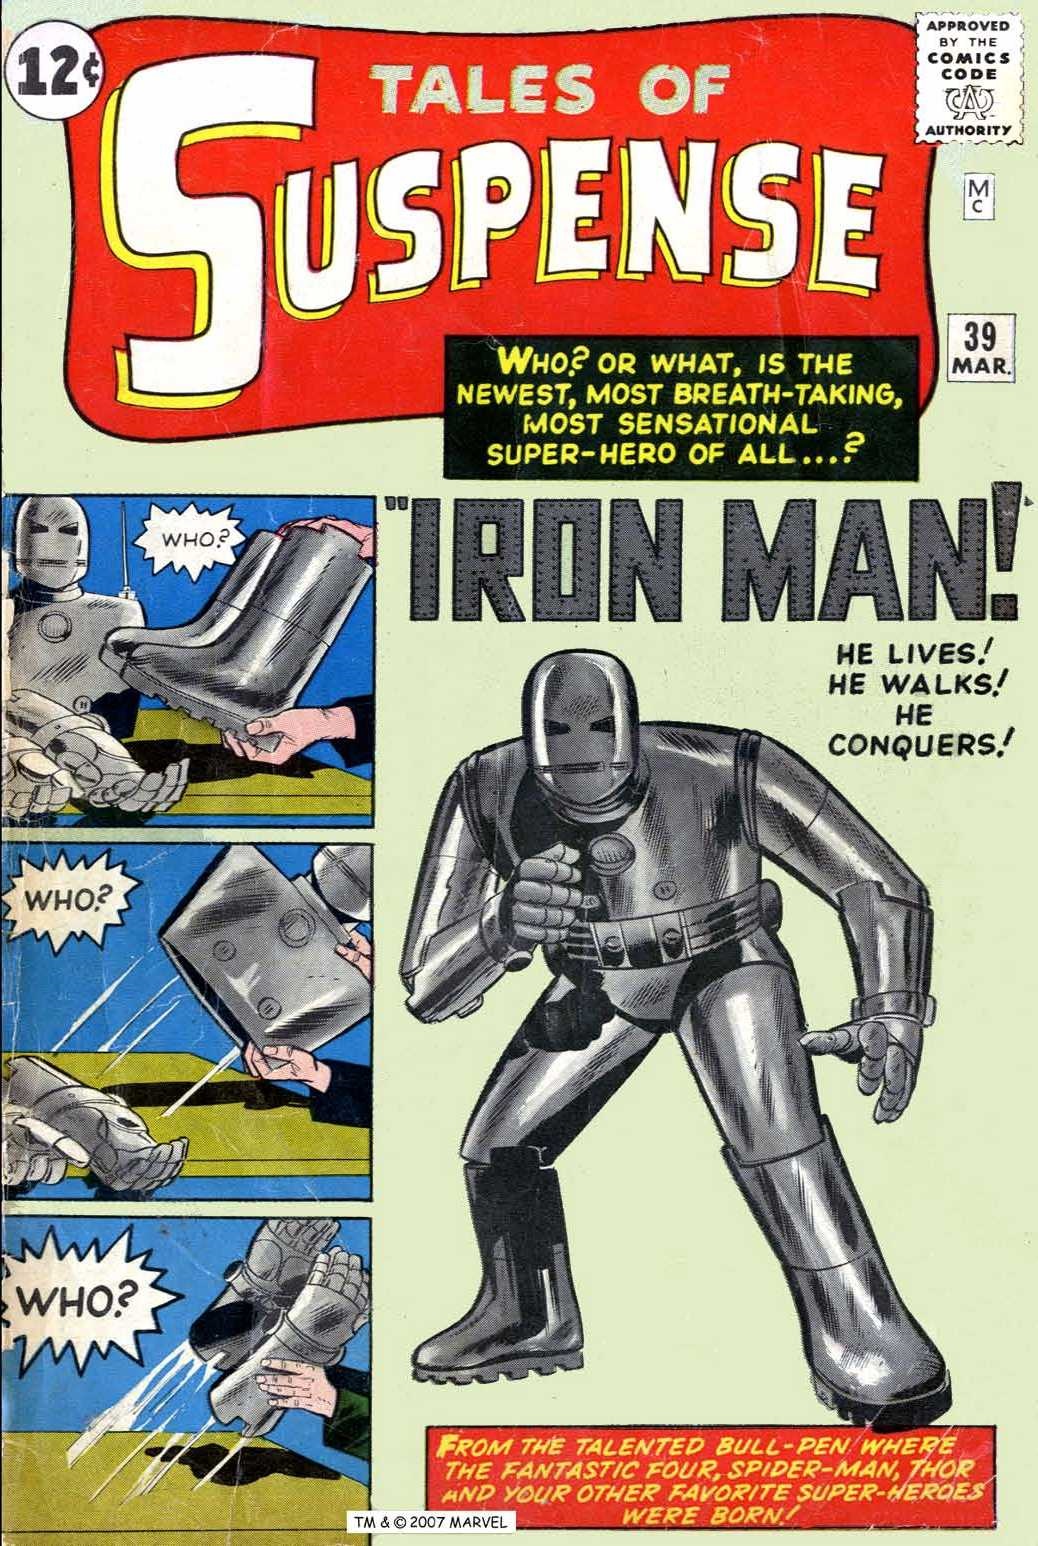 Tales of Suspense #39 (March 1963) cover